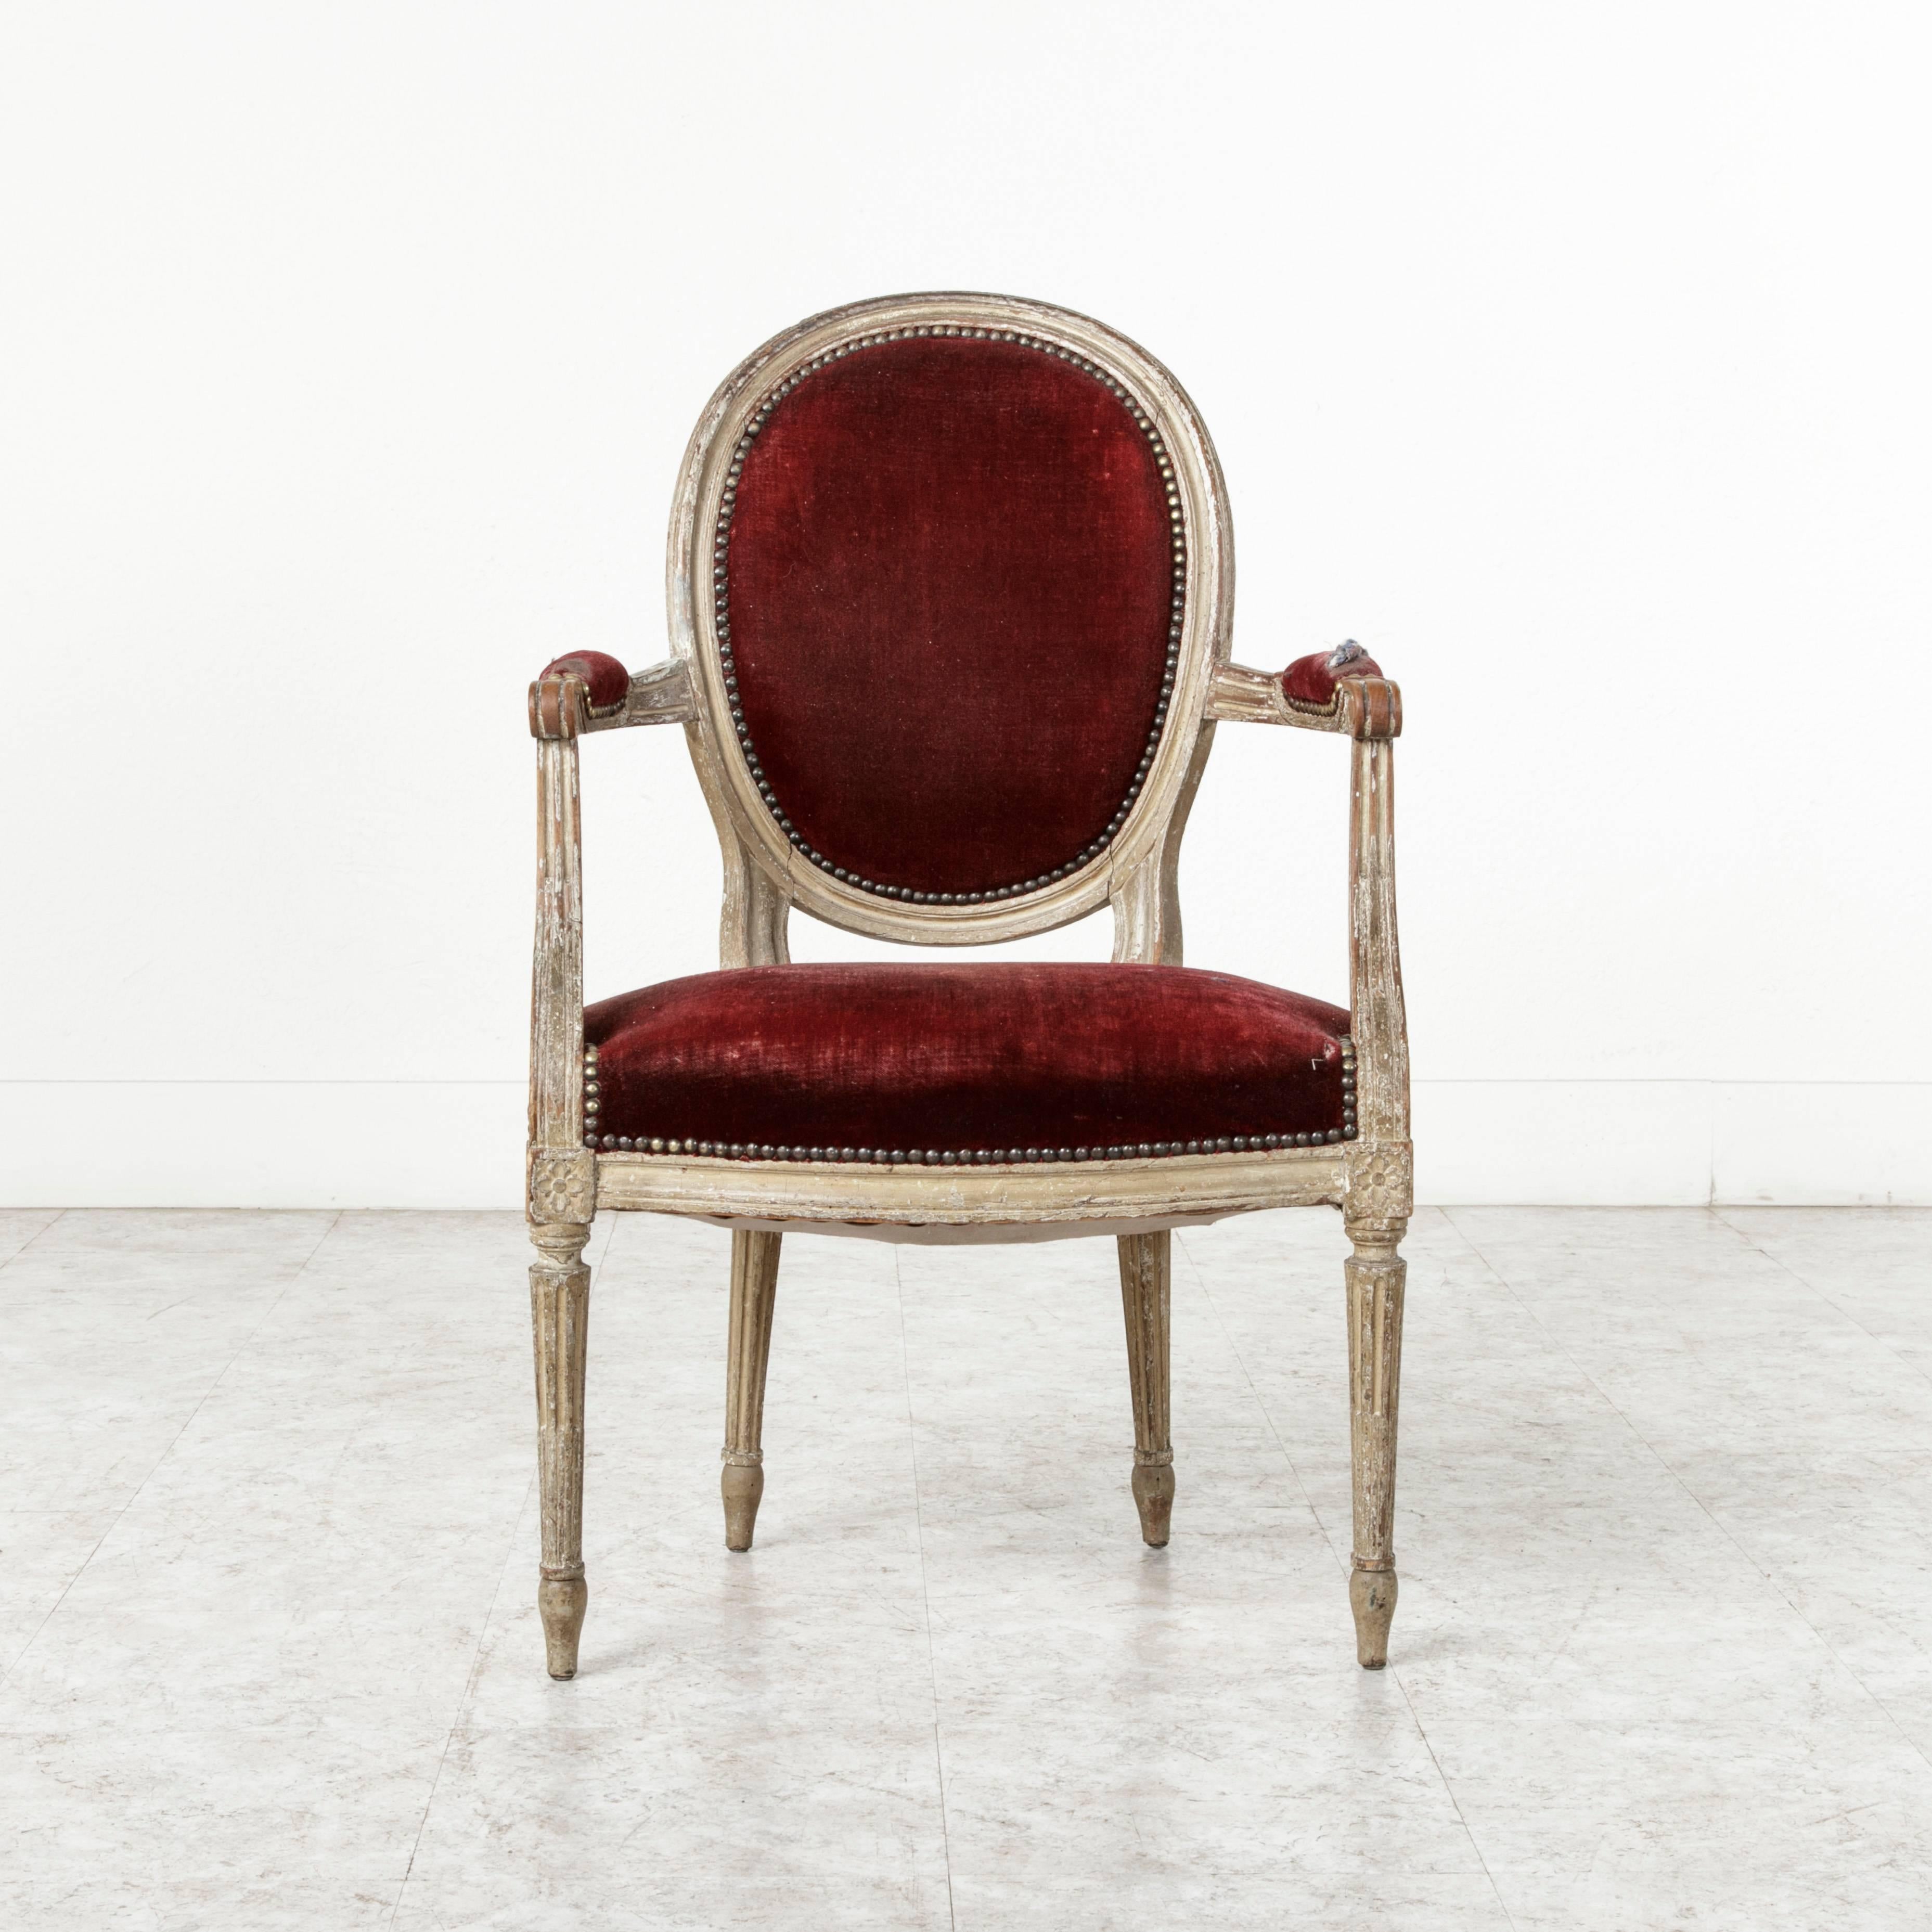 A century of use and vestiges of worn paint have given this Louis XVI cabriolet armchair a patina that only time can create. Its medallion back, cable fluted legs, and rosettes at the die joints are all Classic Louis XVI. Scrolled armrests complete